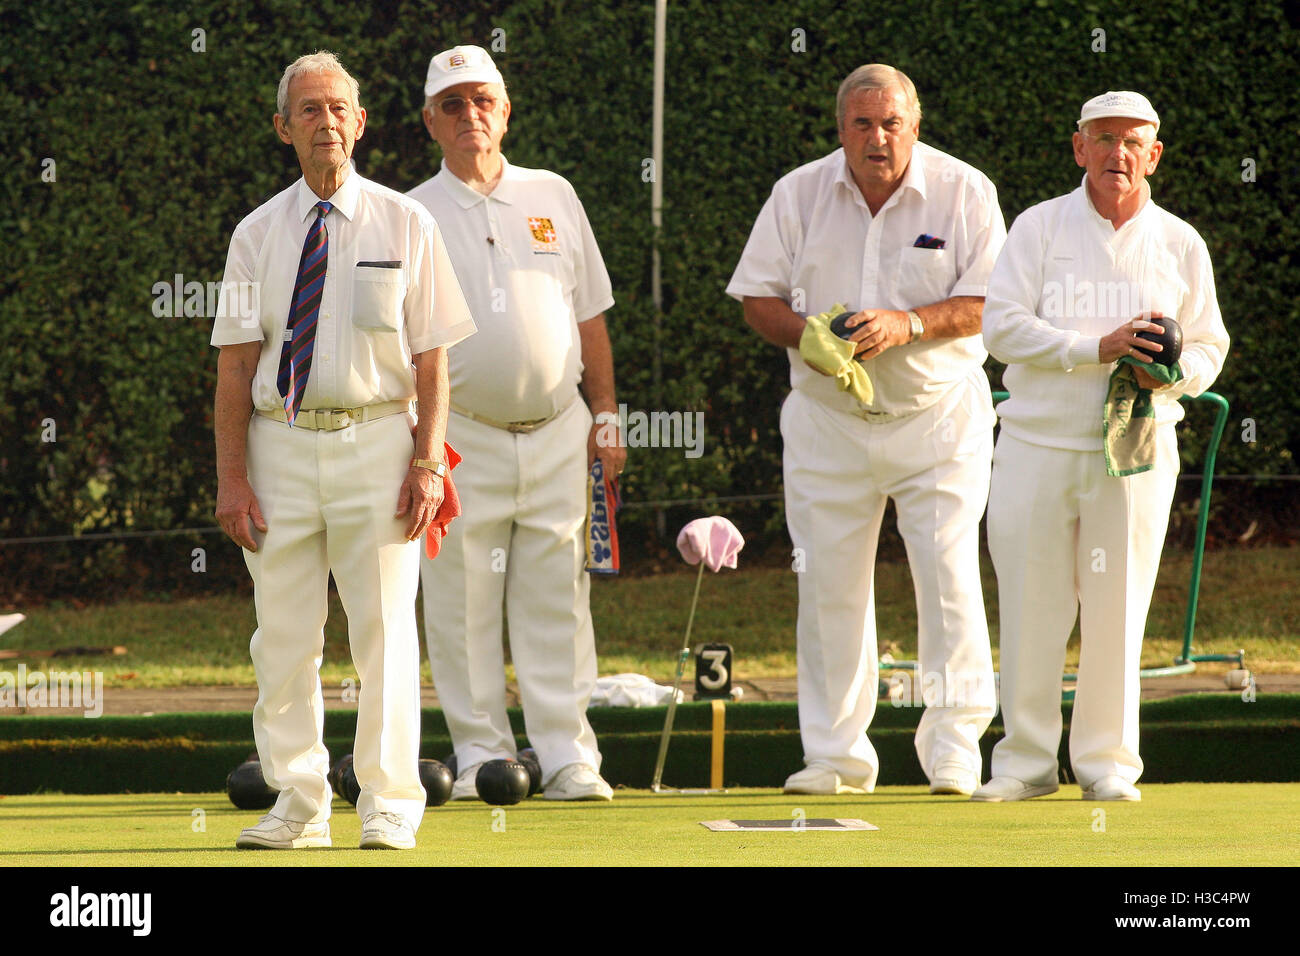 Aldersbrook BC vs Wanstead BC - Jubilee & Churchill Cup Final at South Woodford Bowls Club - 13/08/10 Stock Photo